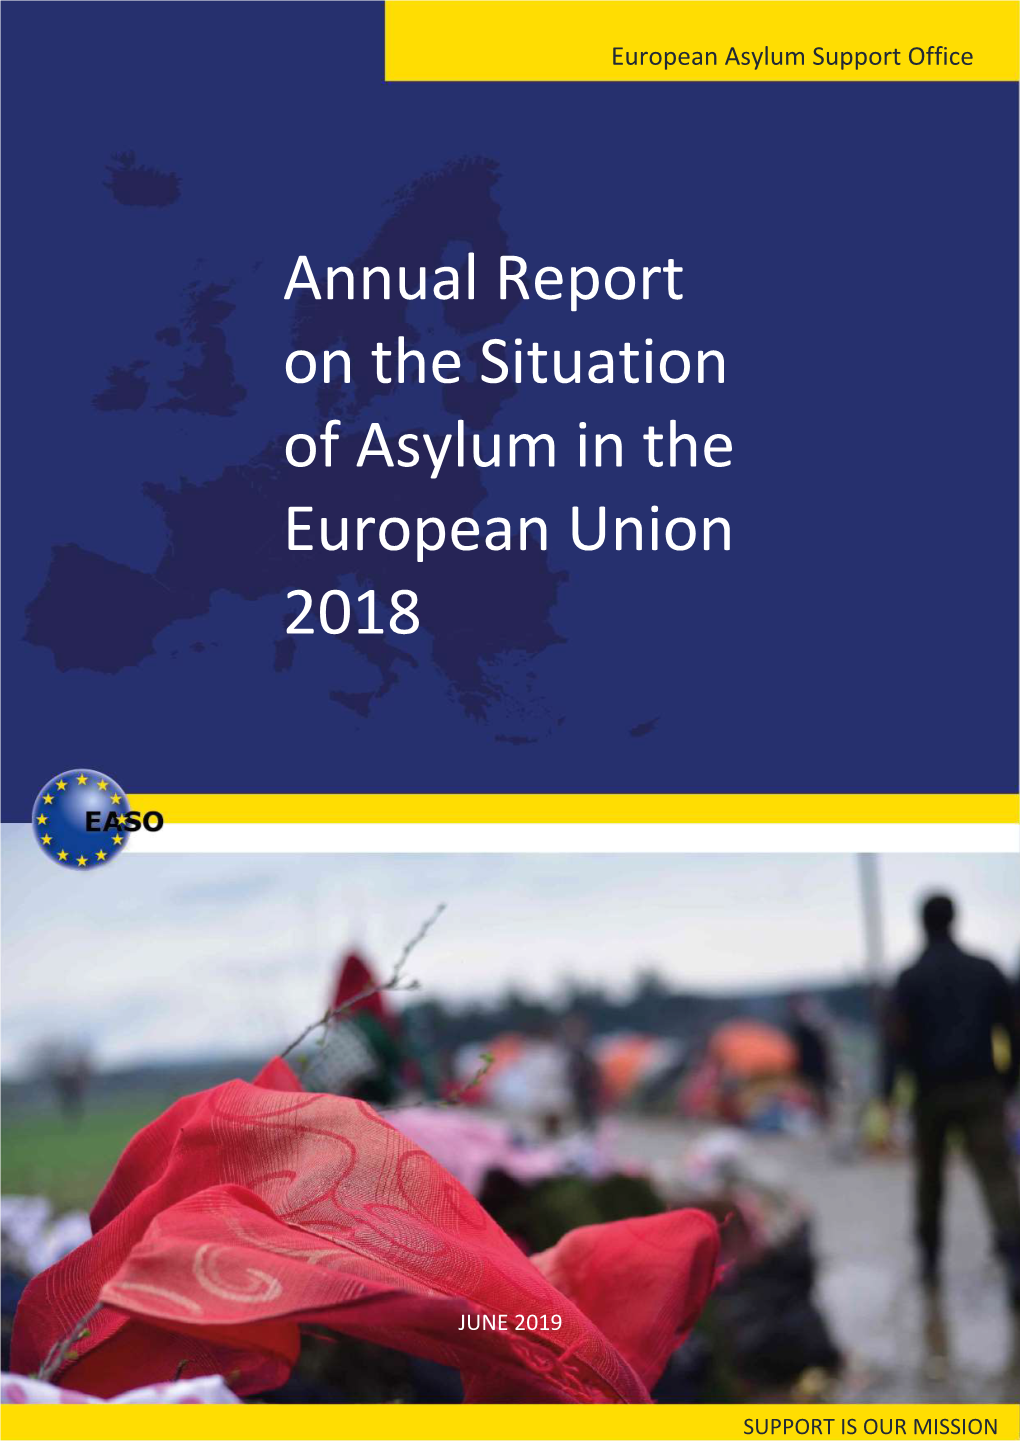 Annual Report on the Situation of Asylum in the European Union 2018